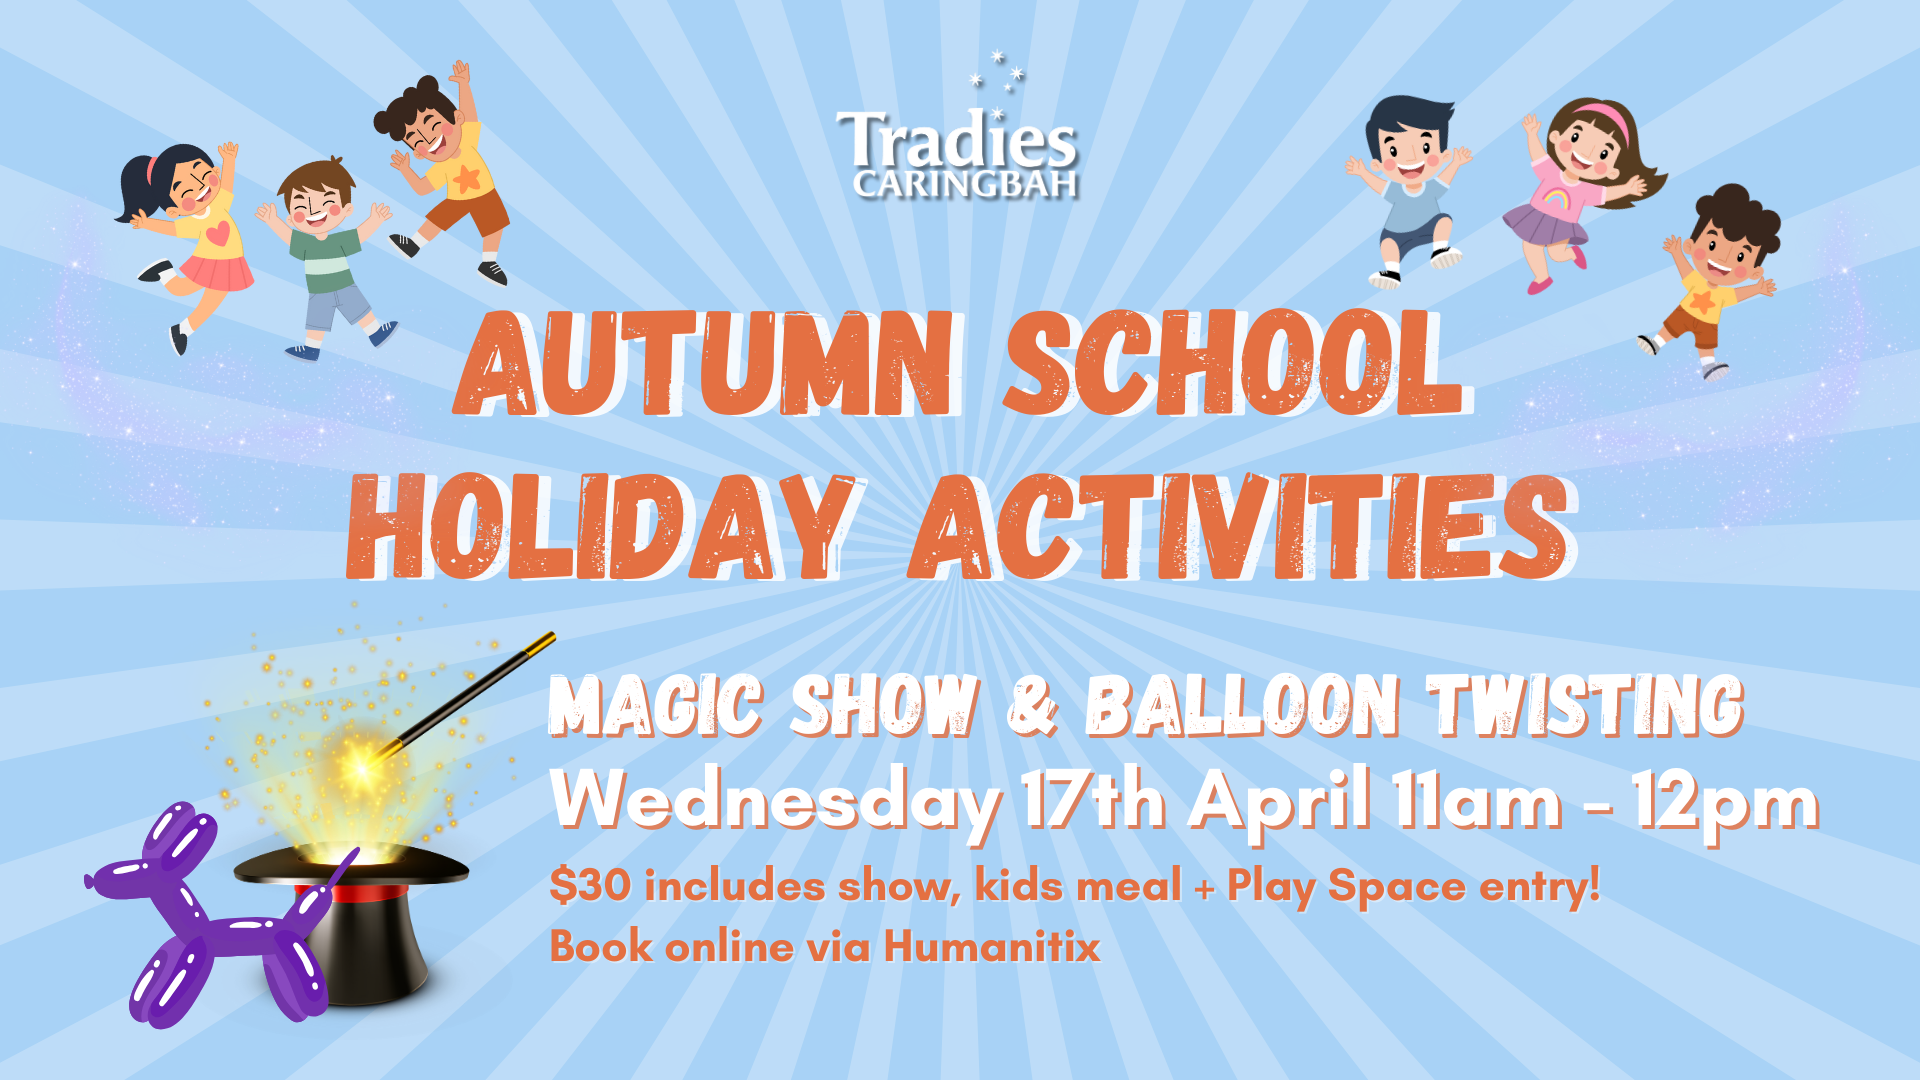 School holiday fun for the kids at Tradies Caringbah! Magic Show and Balloon Twisting Wednesday April 17th.